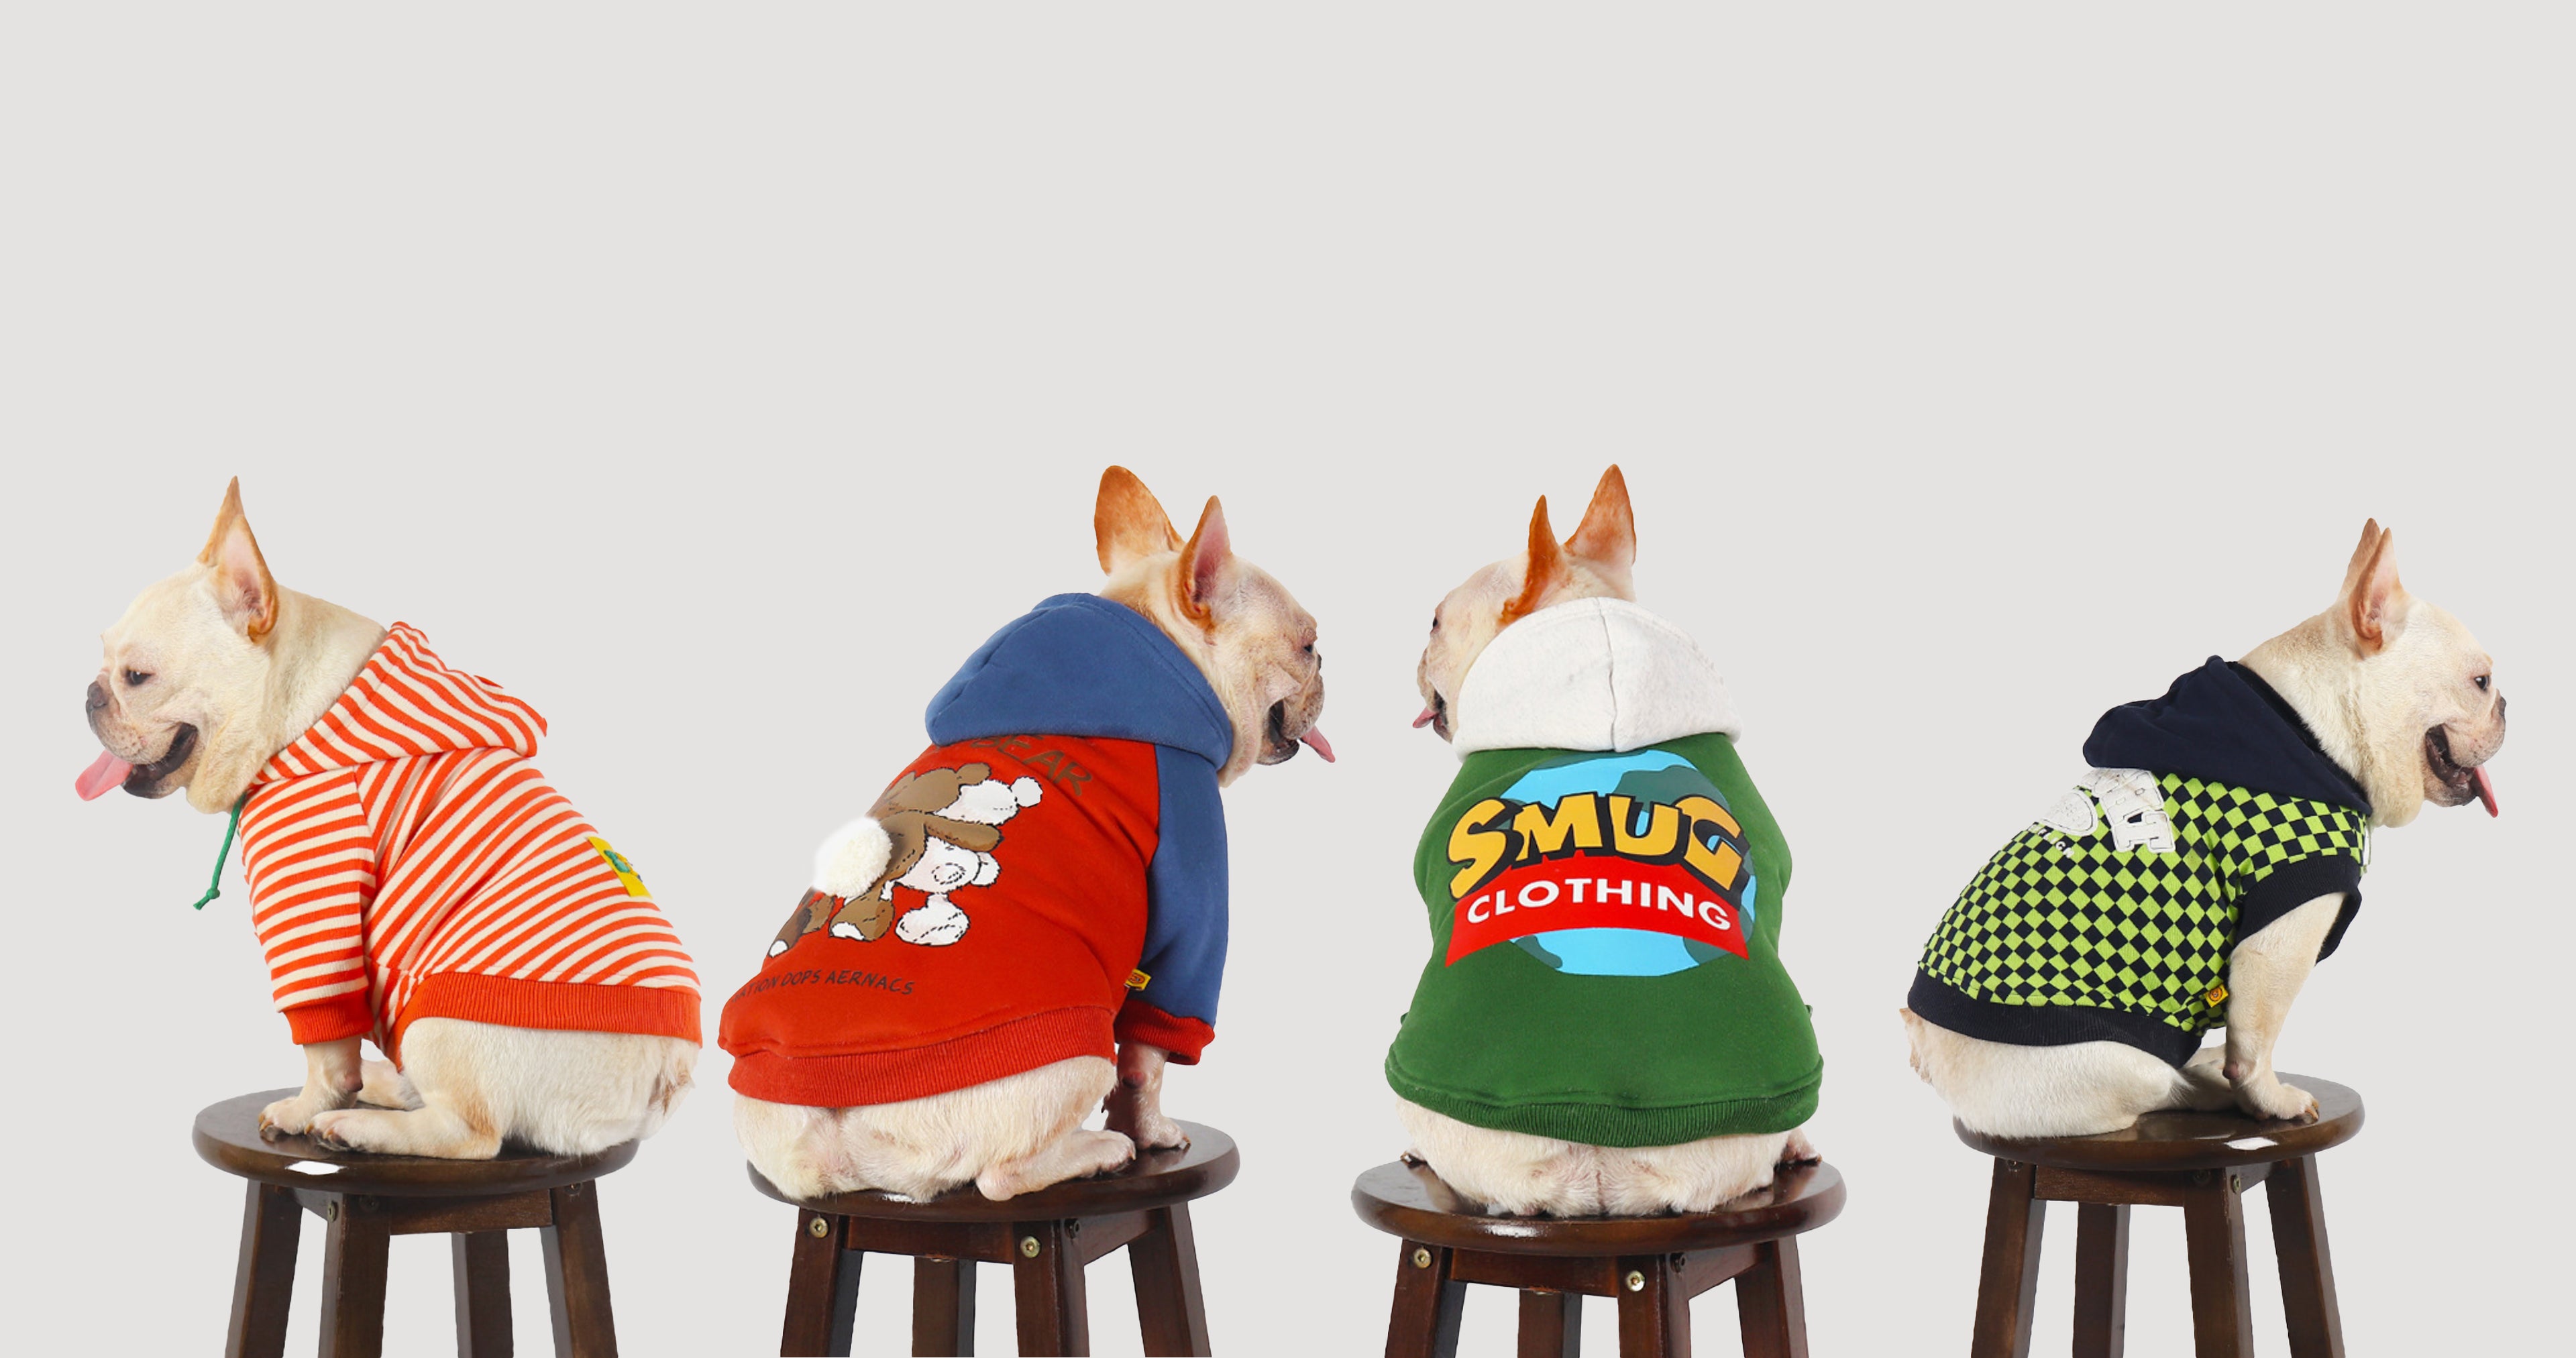 Slideshow: French Bulldogs in Assorted Hoodies